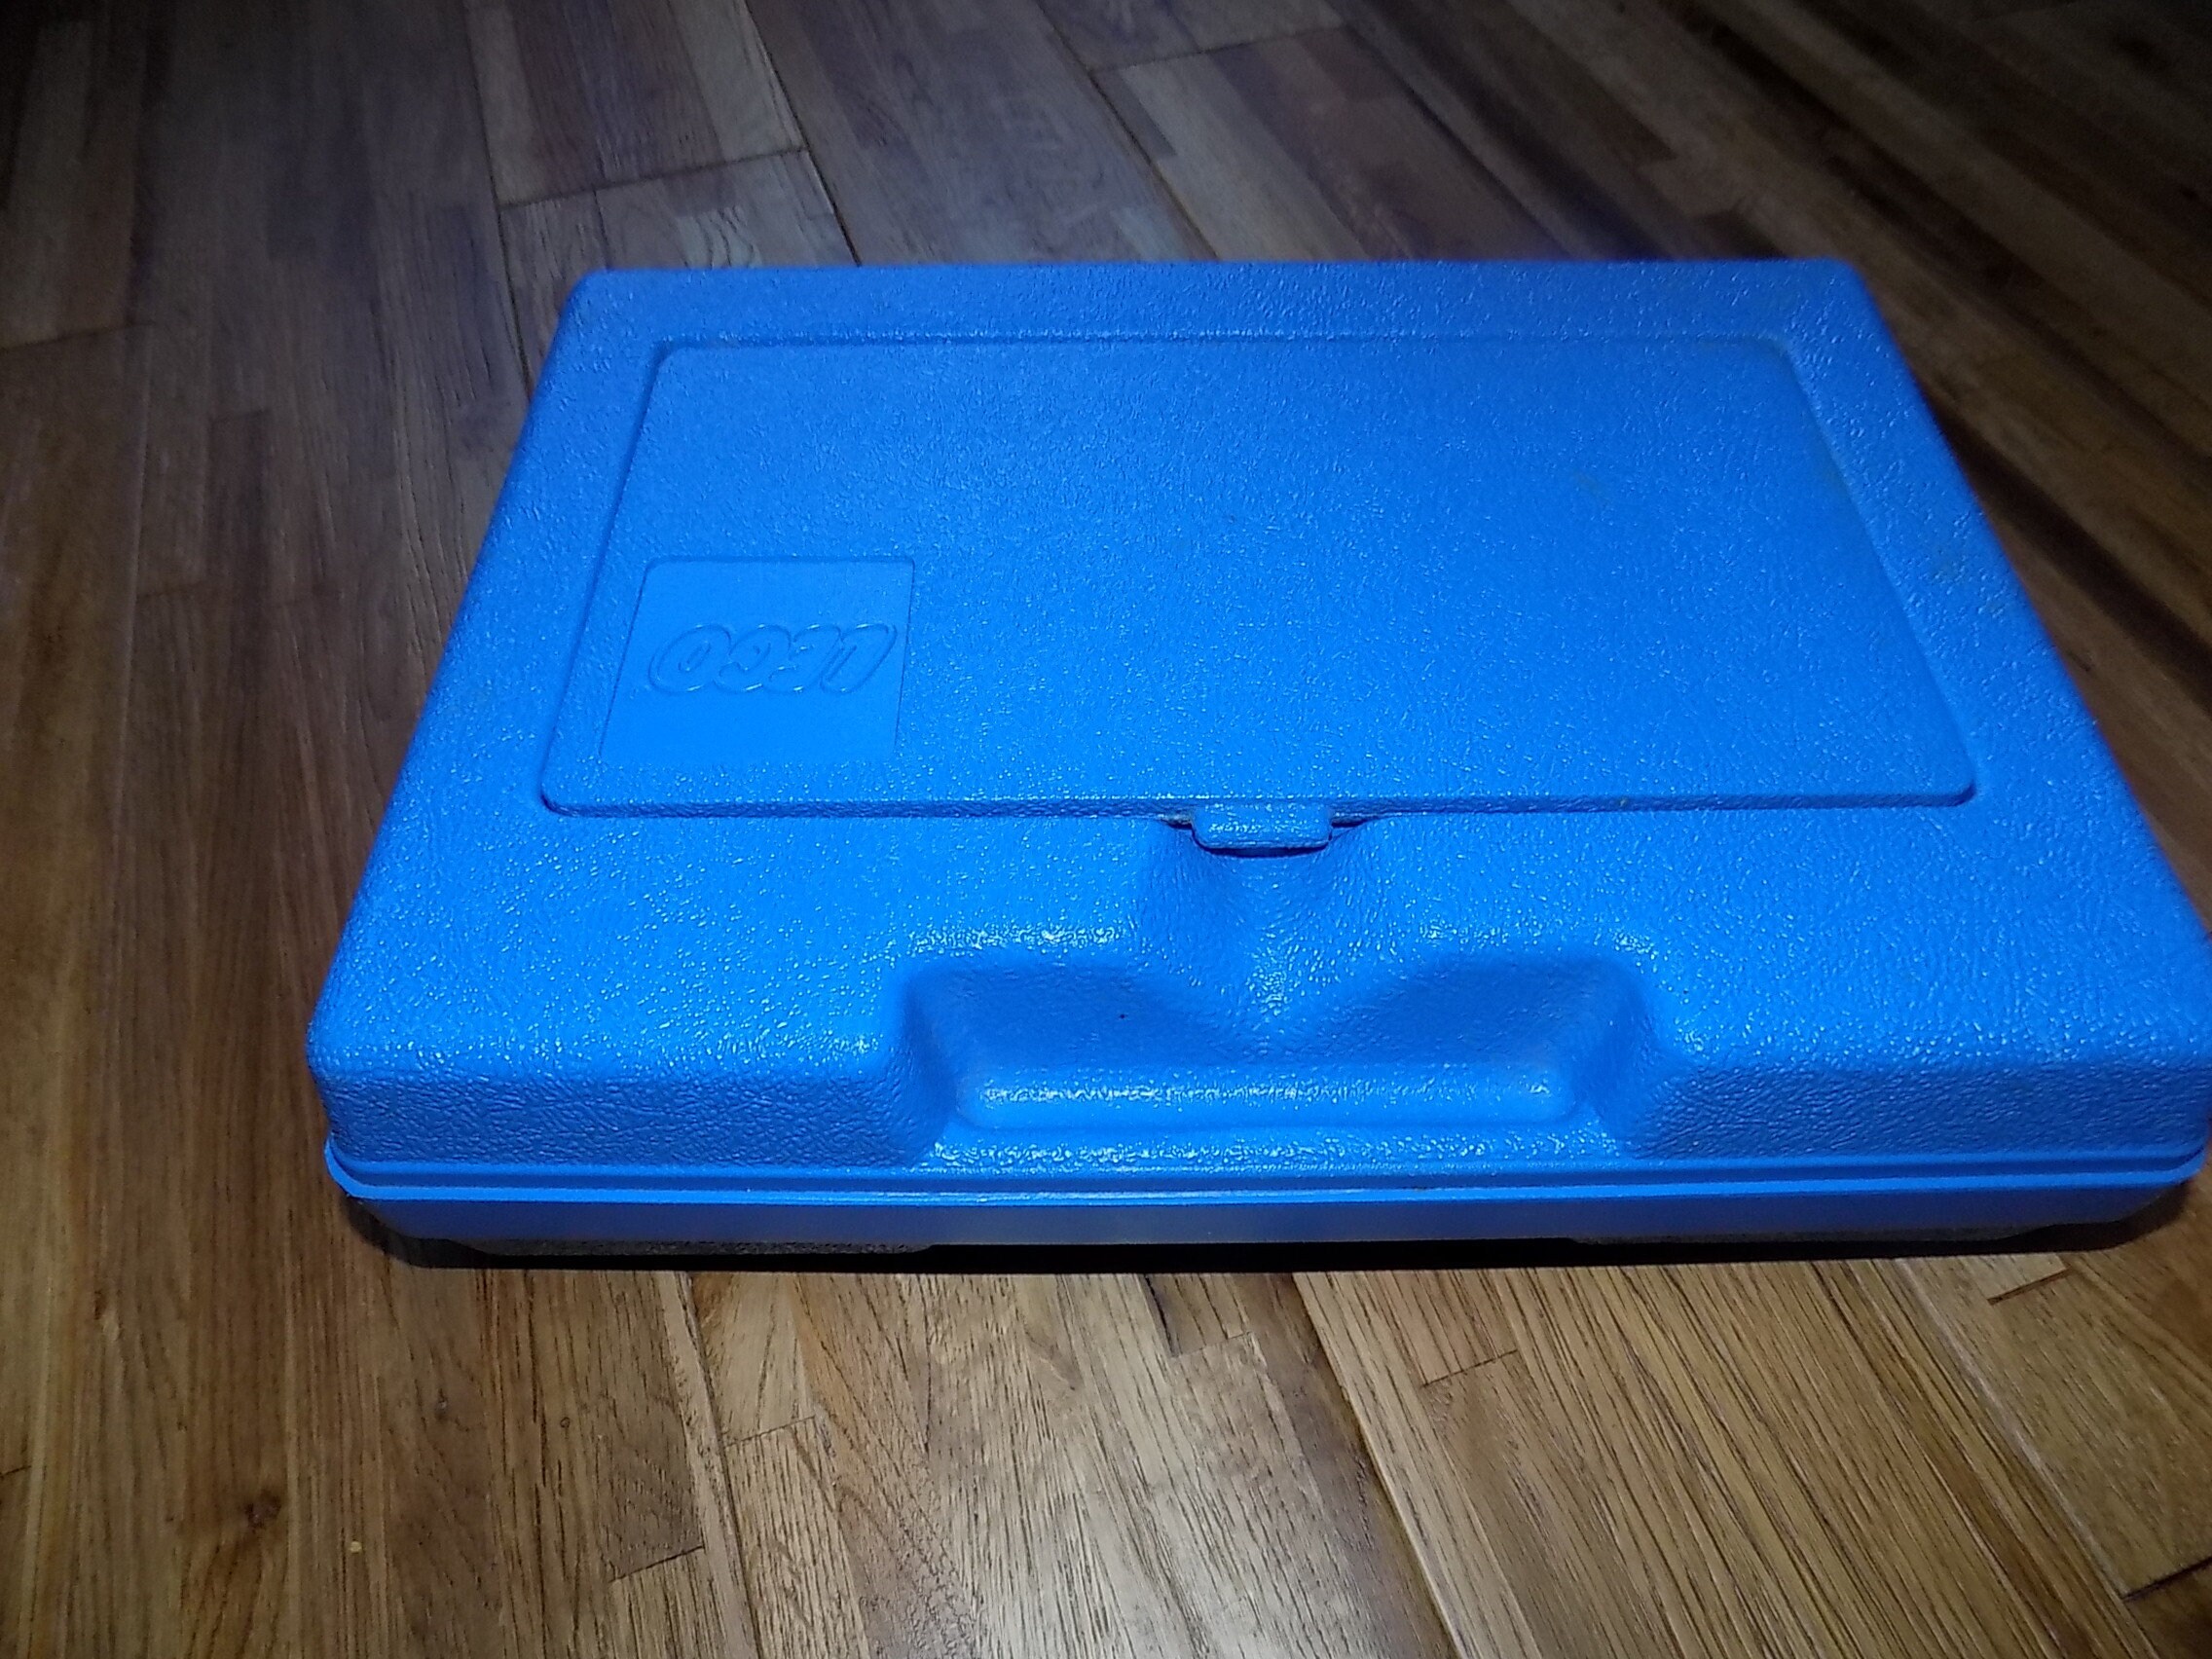 VTG 1997 Blue Lego Storage Container Carrying Case Holder Box Made in USA